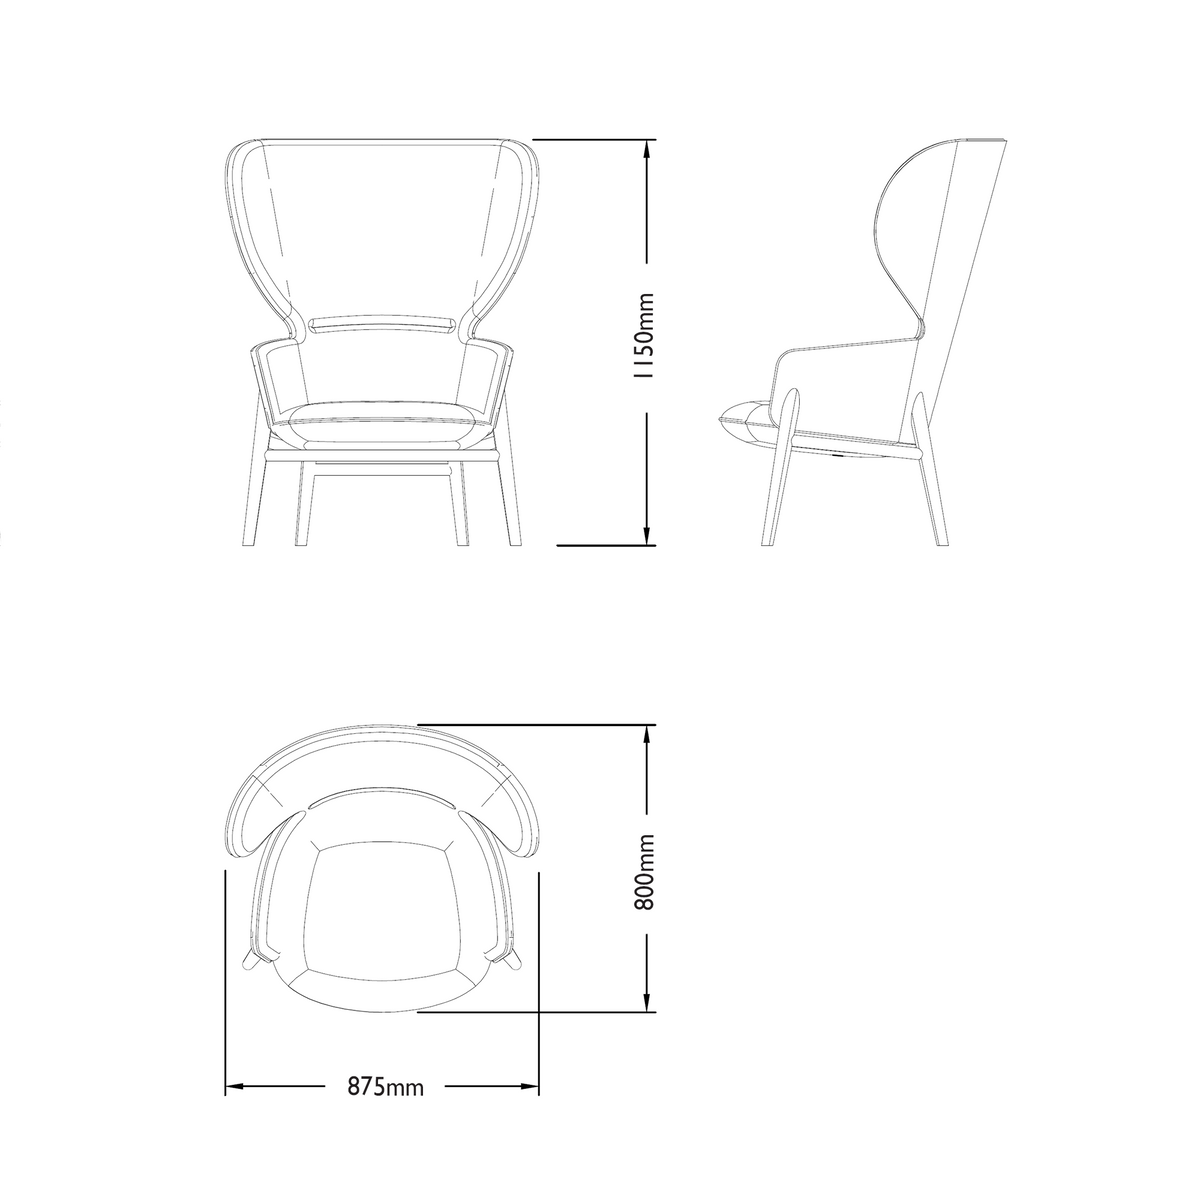 Dimensions for Connection Office Hygge High Back Oak Chair